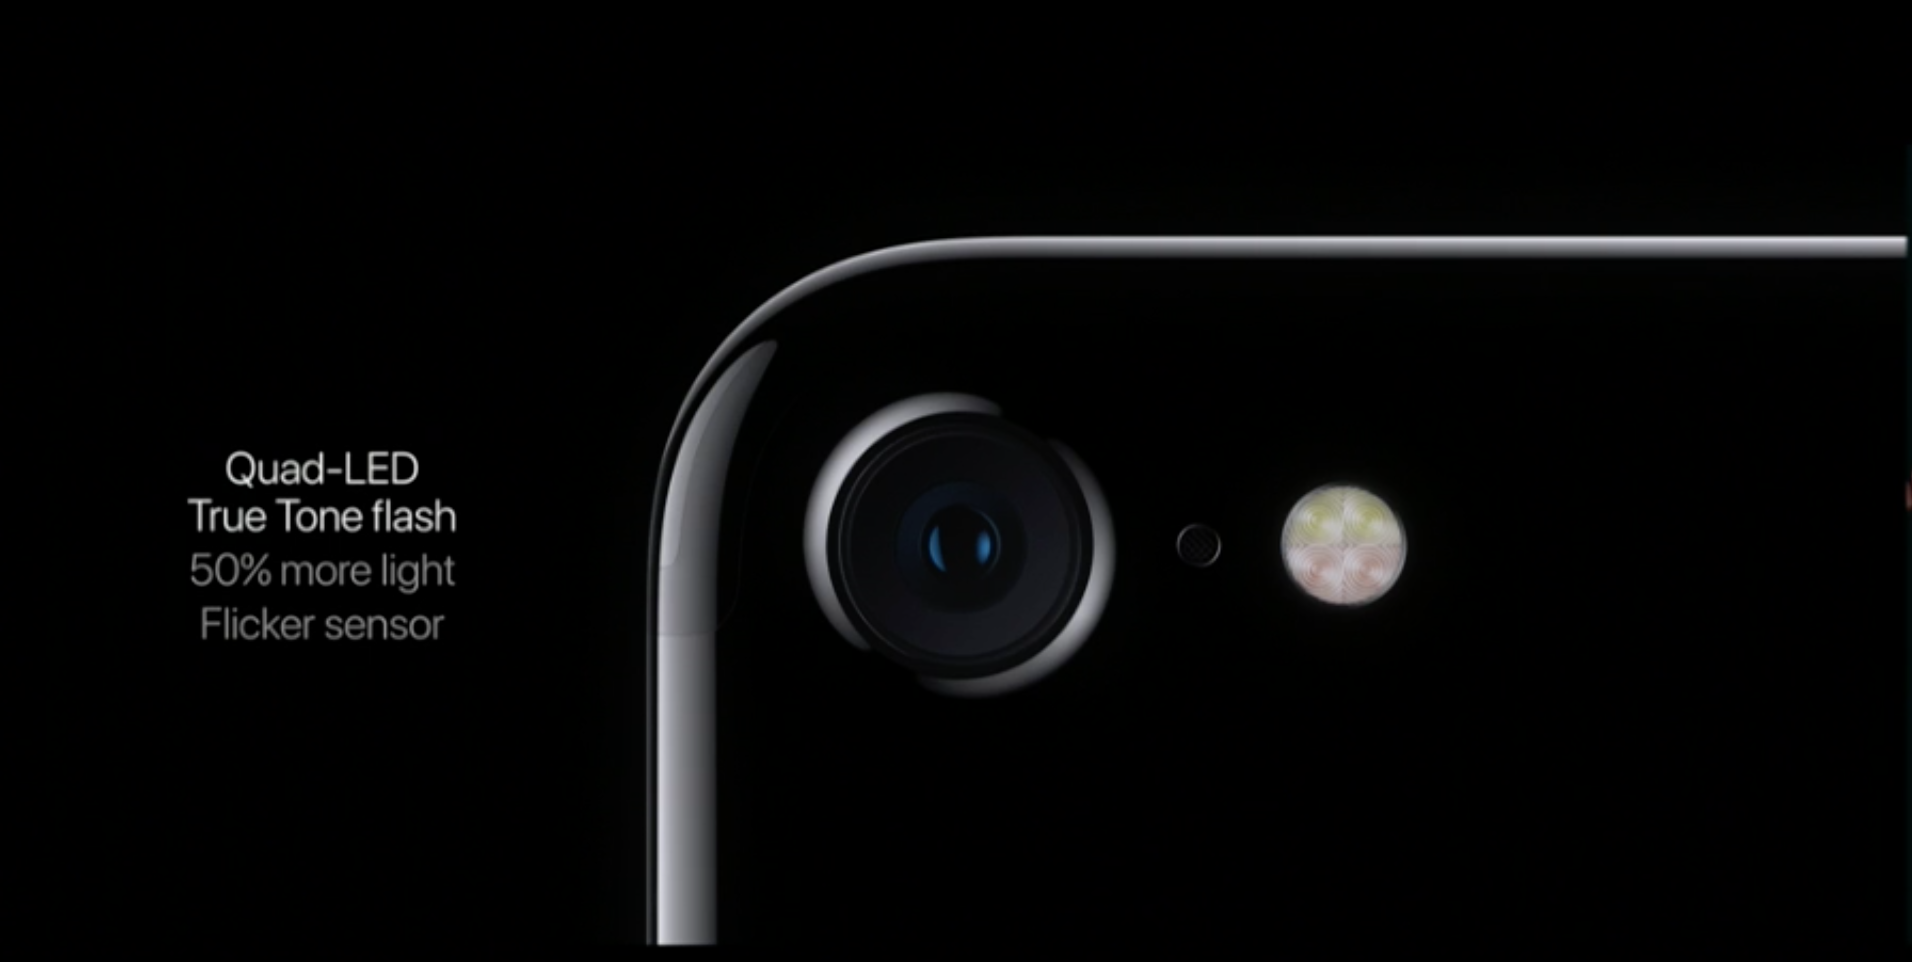 The iPhone 7's rear camera.